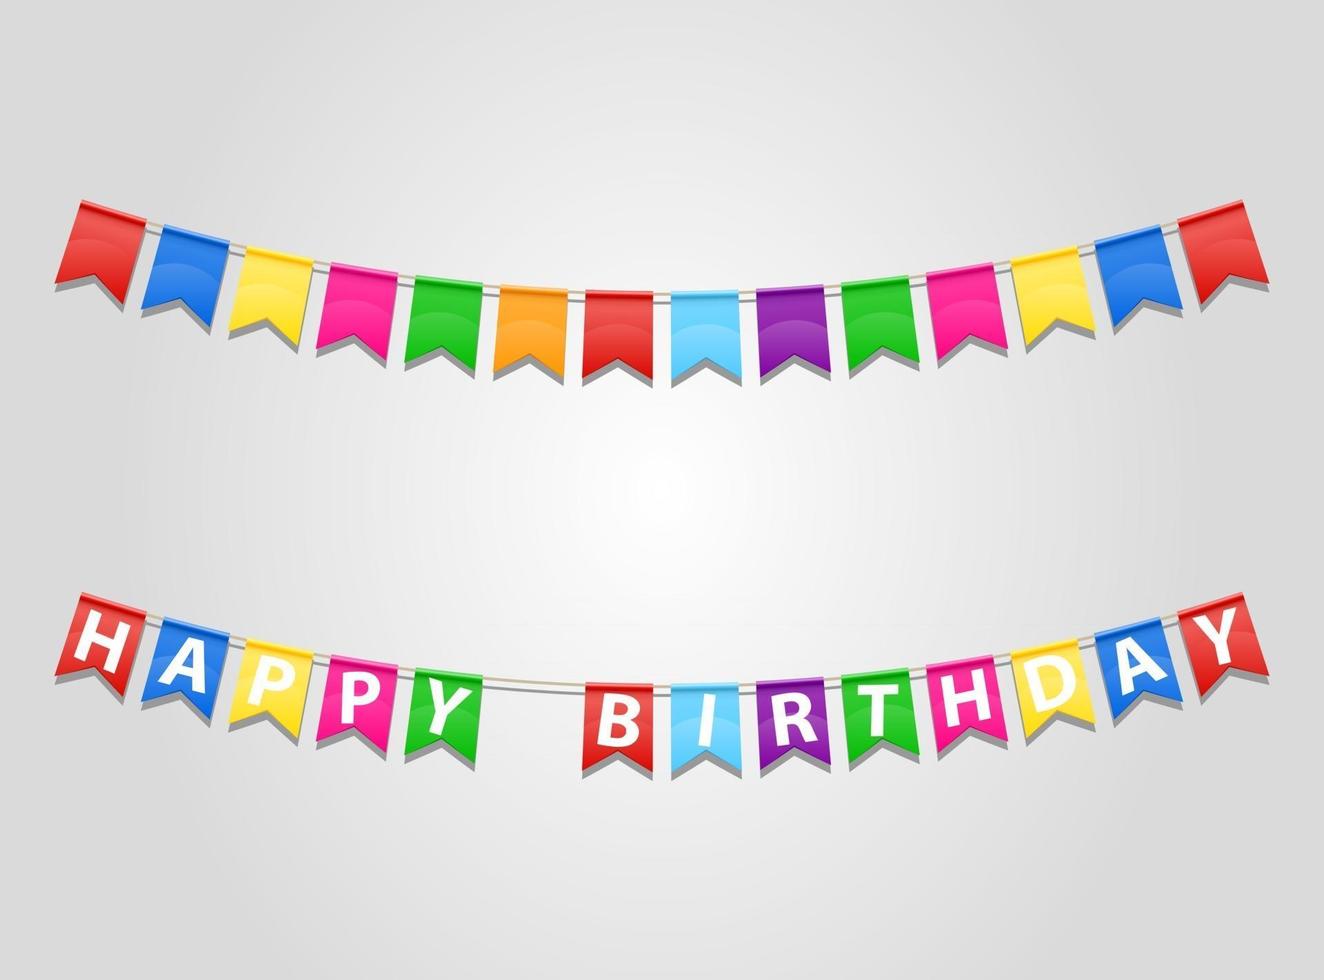 happy birthday inscription text stock vector illustration isolated on white background